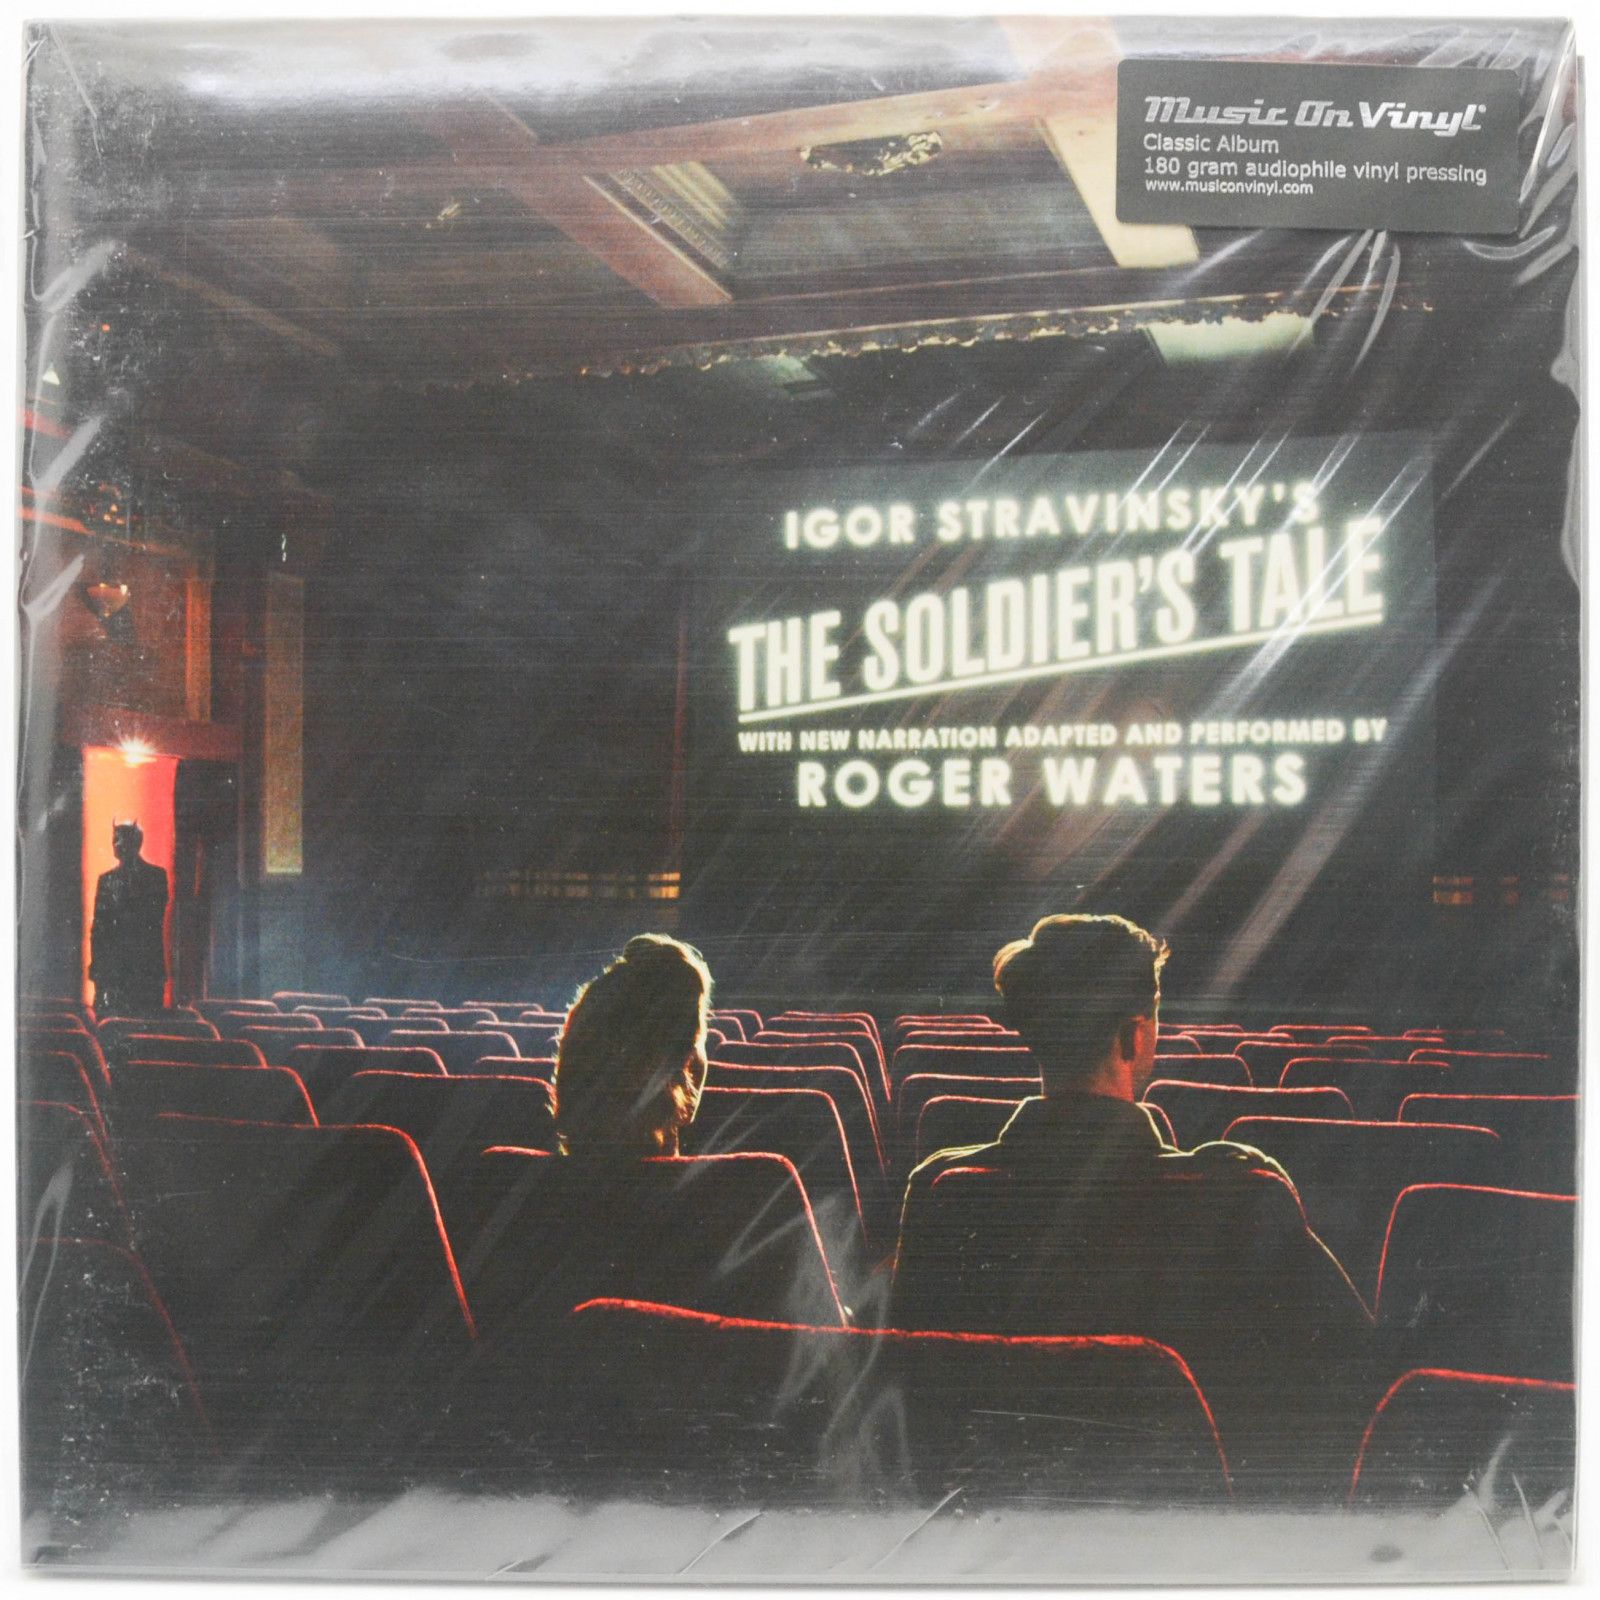 Igor Stravinsky, Roger Waters, BCMF — Igor Stravinsky’s The Soldier’s Tale With New Narration Adapted And Performed By Roger Waters (2LP), 2018